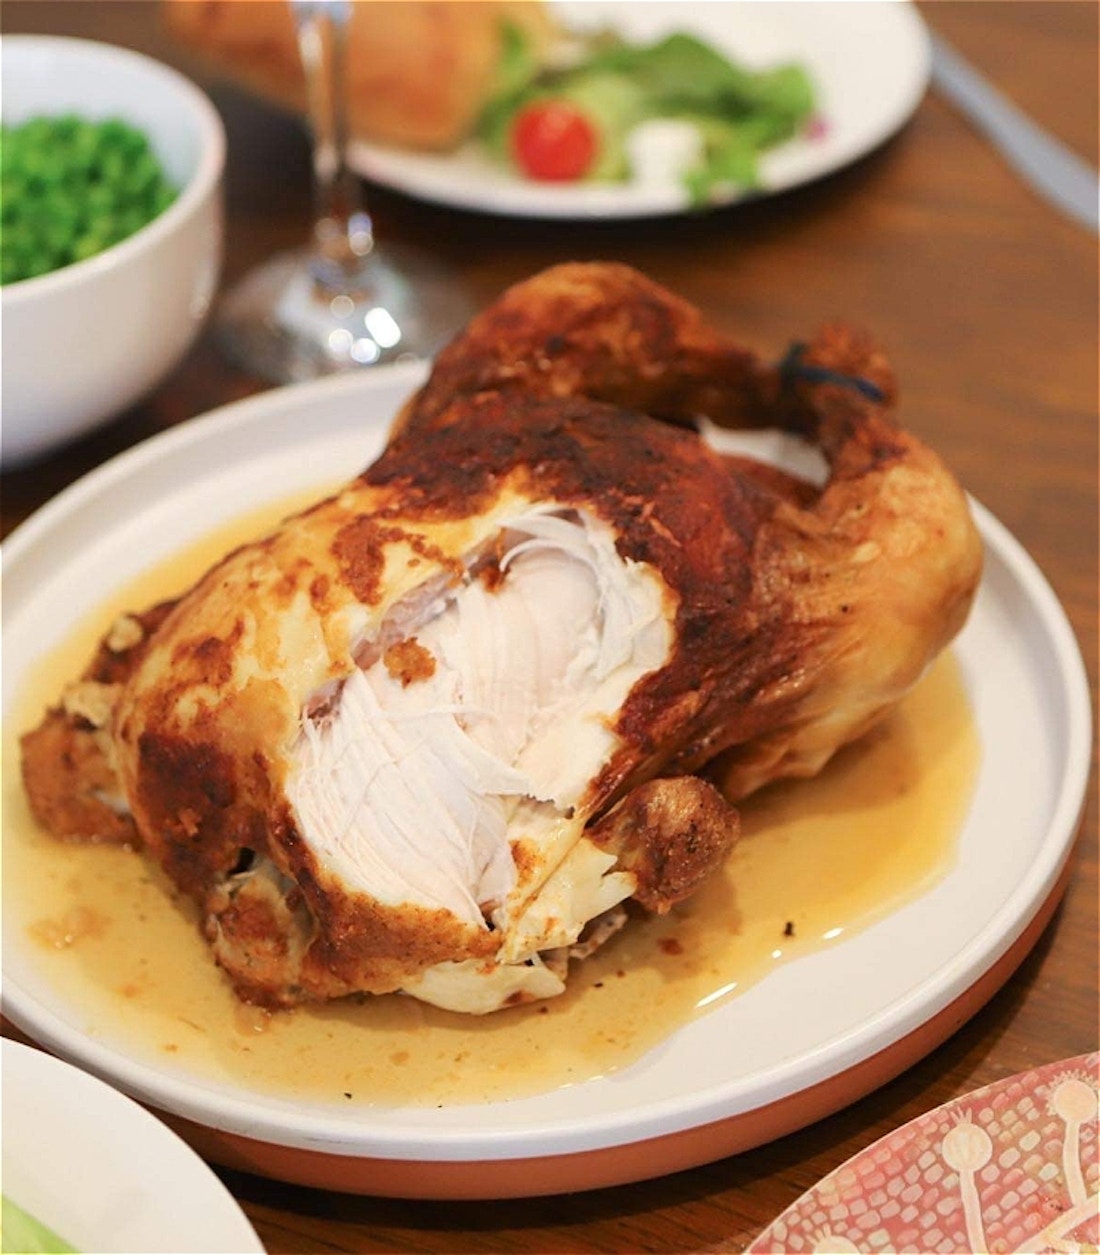 Central to this image is a close up of a rotisserie cooked chicken on a white plate with its orange-ish chicken juice pooling underneath it, all on top of a wooden dining table background. A piece of the chicken breast has been ripped off by an unseen person revealing the sinewy white meat within – it doesn't look very appetising. Placed behind and in front of the chicken, slightly out of focus, are side dishes; there are bright green peas, a green bottle of sparkling water, the stem of a wine glass, and then another plate with some salad greens, a red tomato, and what could be the missing piece of chicken breast – a blurry dinner knife is next to this plate. At the bottom of the image there are the edges of two more plates suggesting the table is set for a normal, suburban, family dinner.